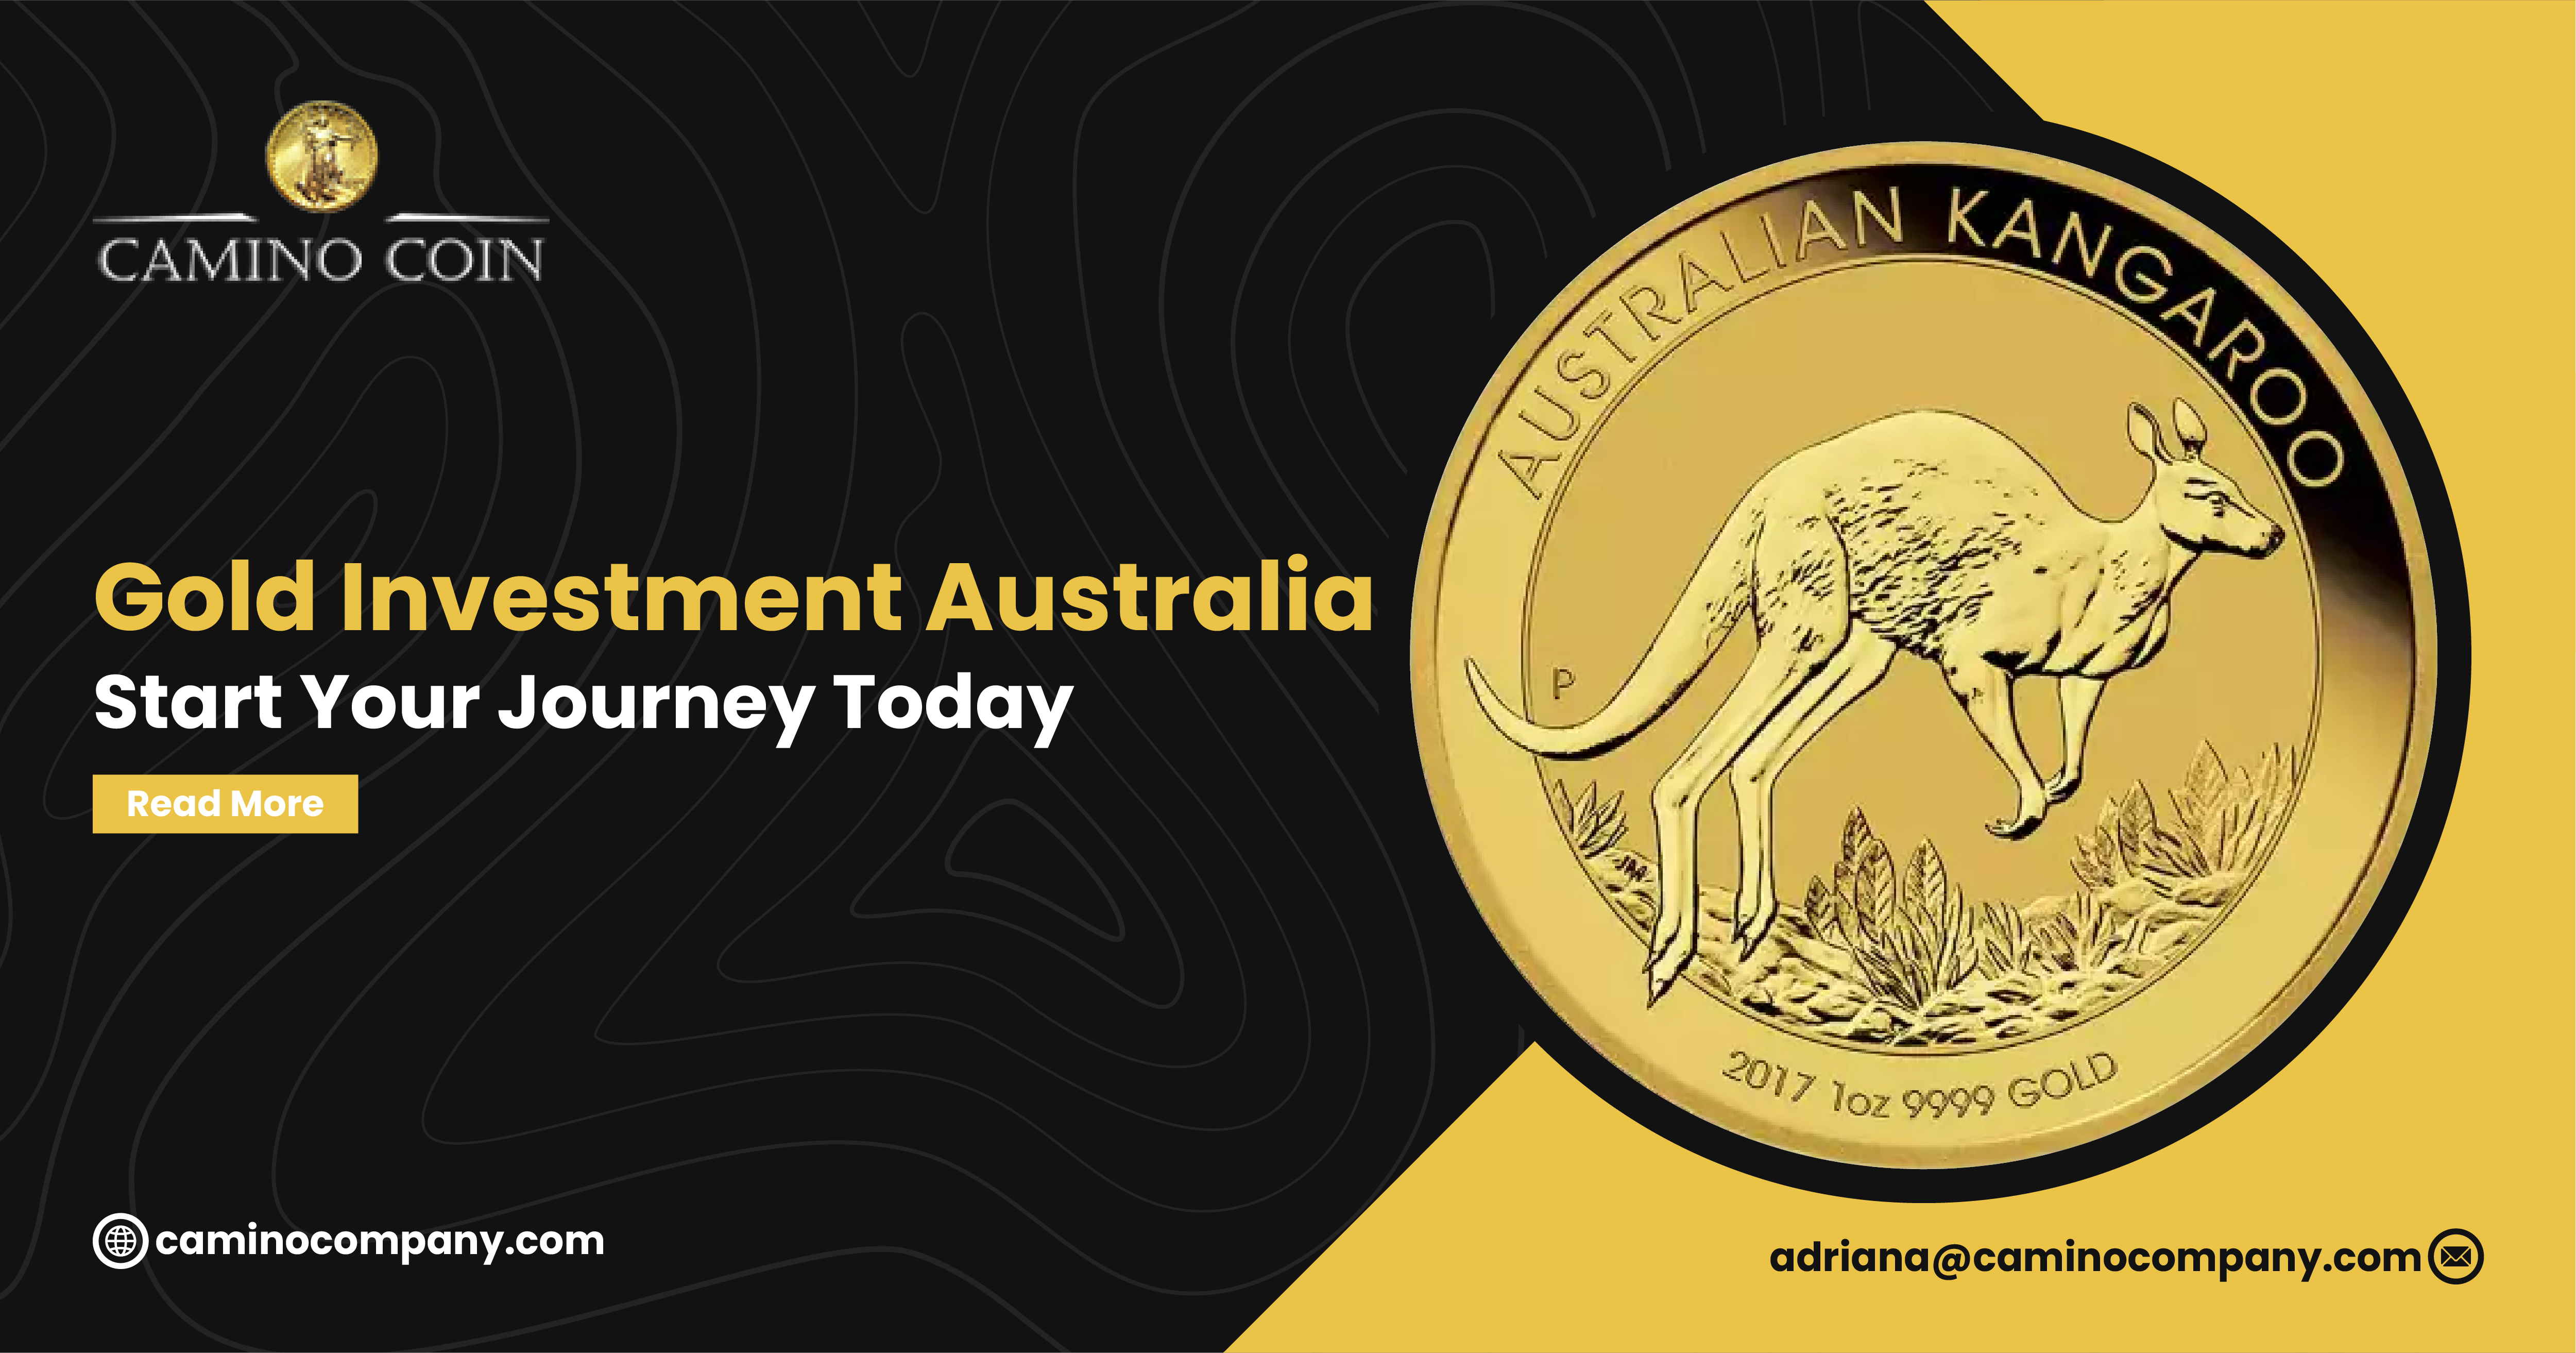  Gold Investment Australia: Start Your Journey Today 